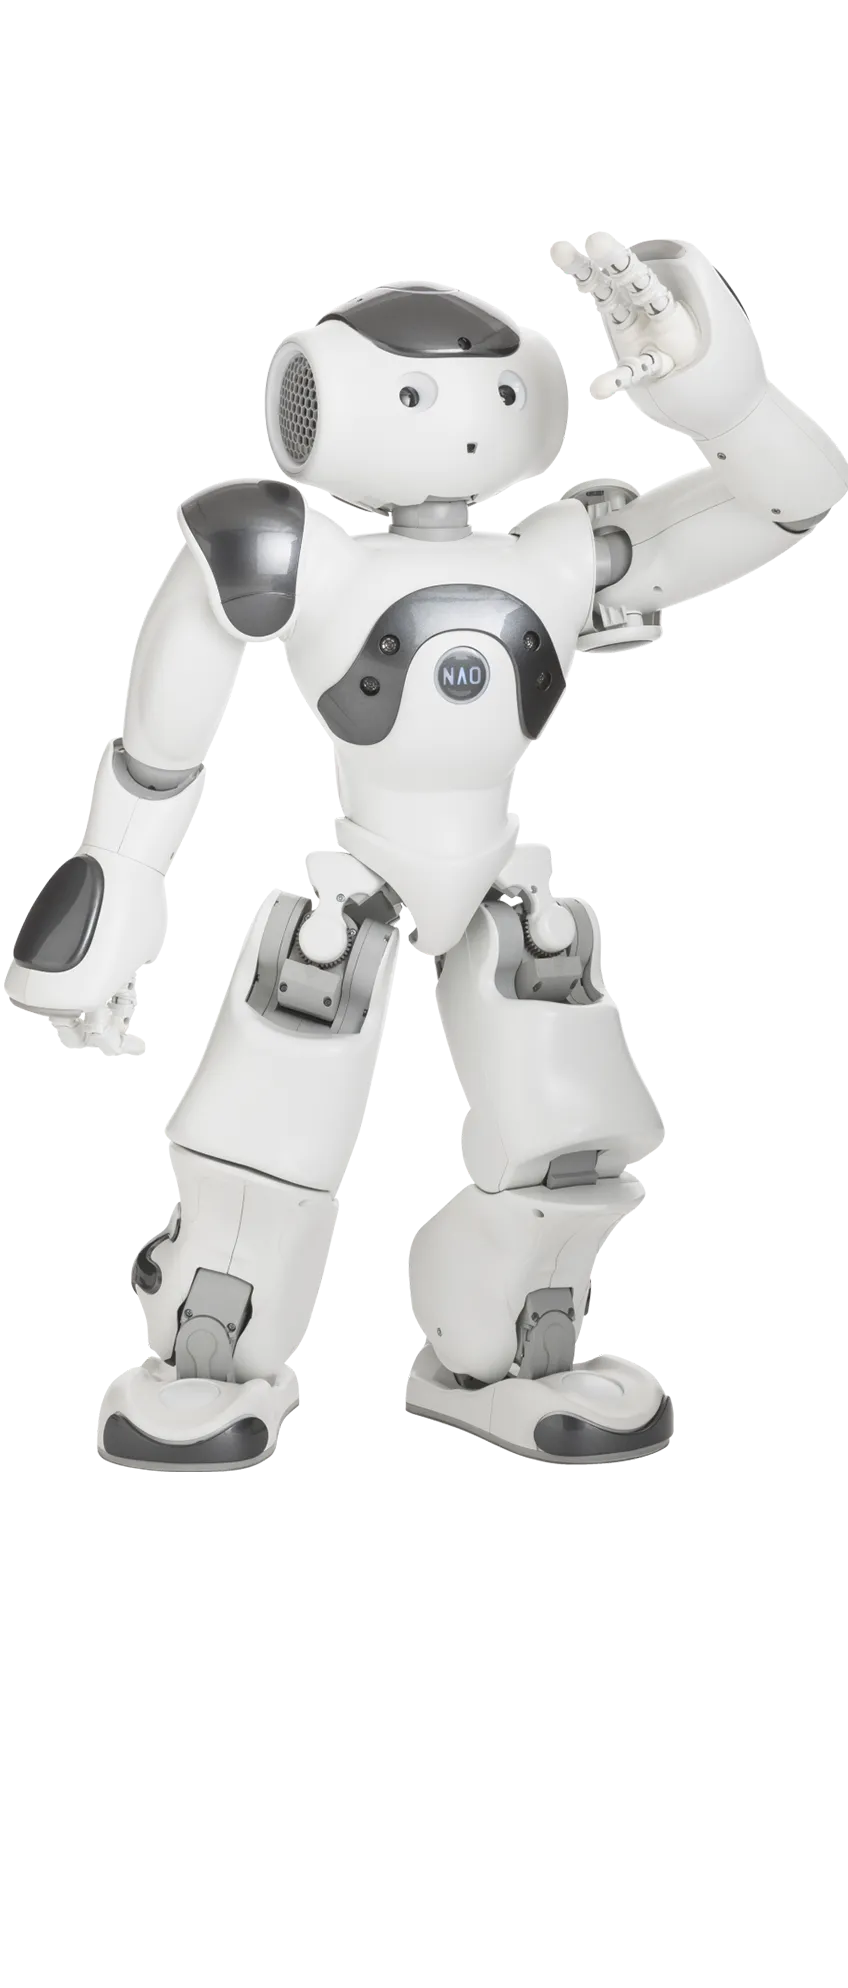 NAO robot - Right side